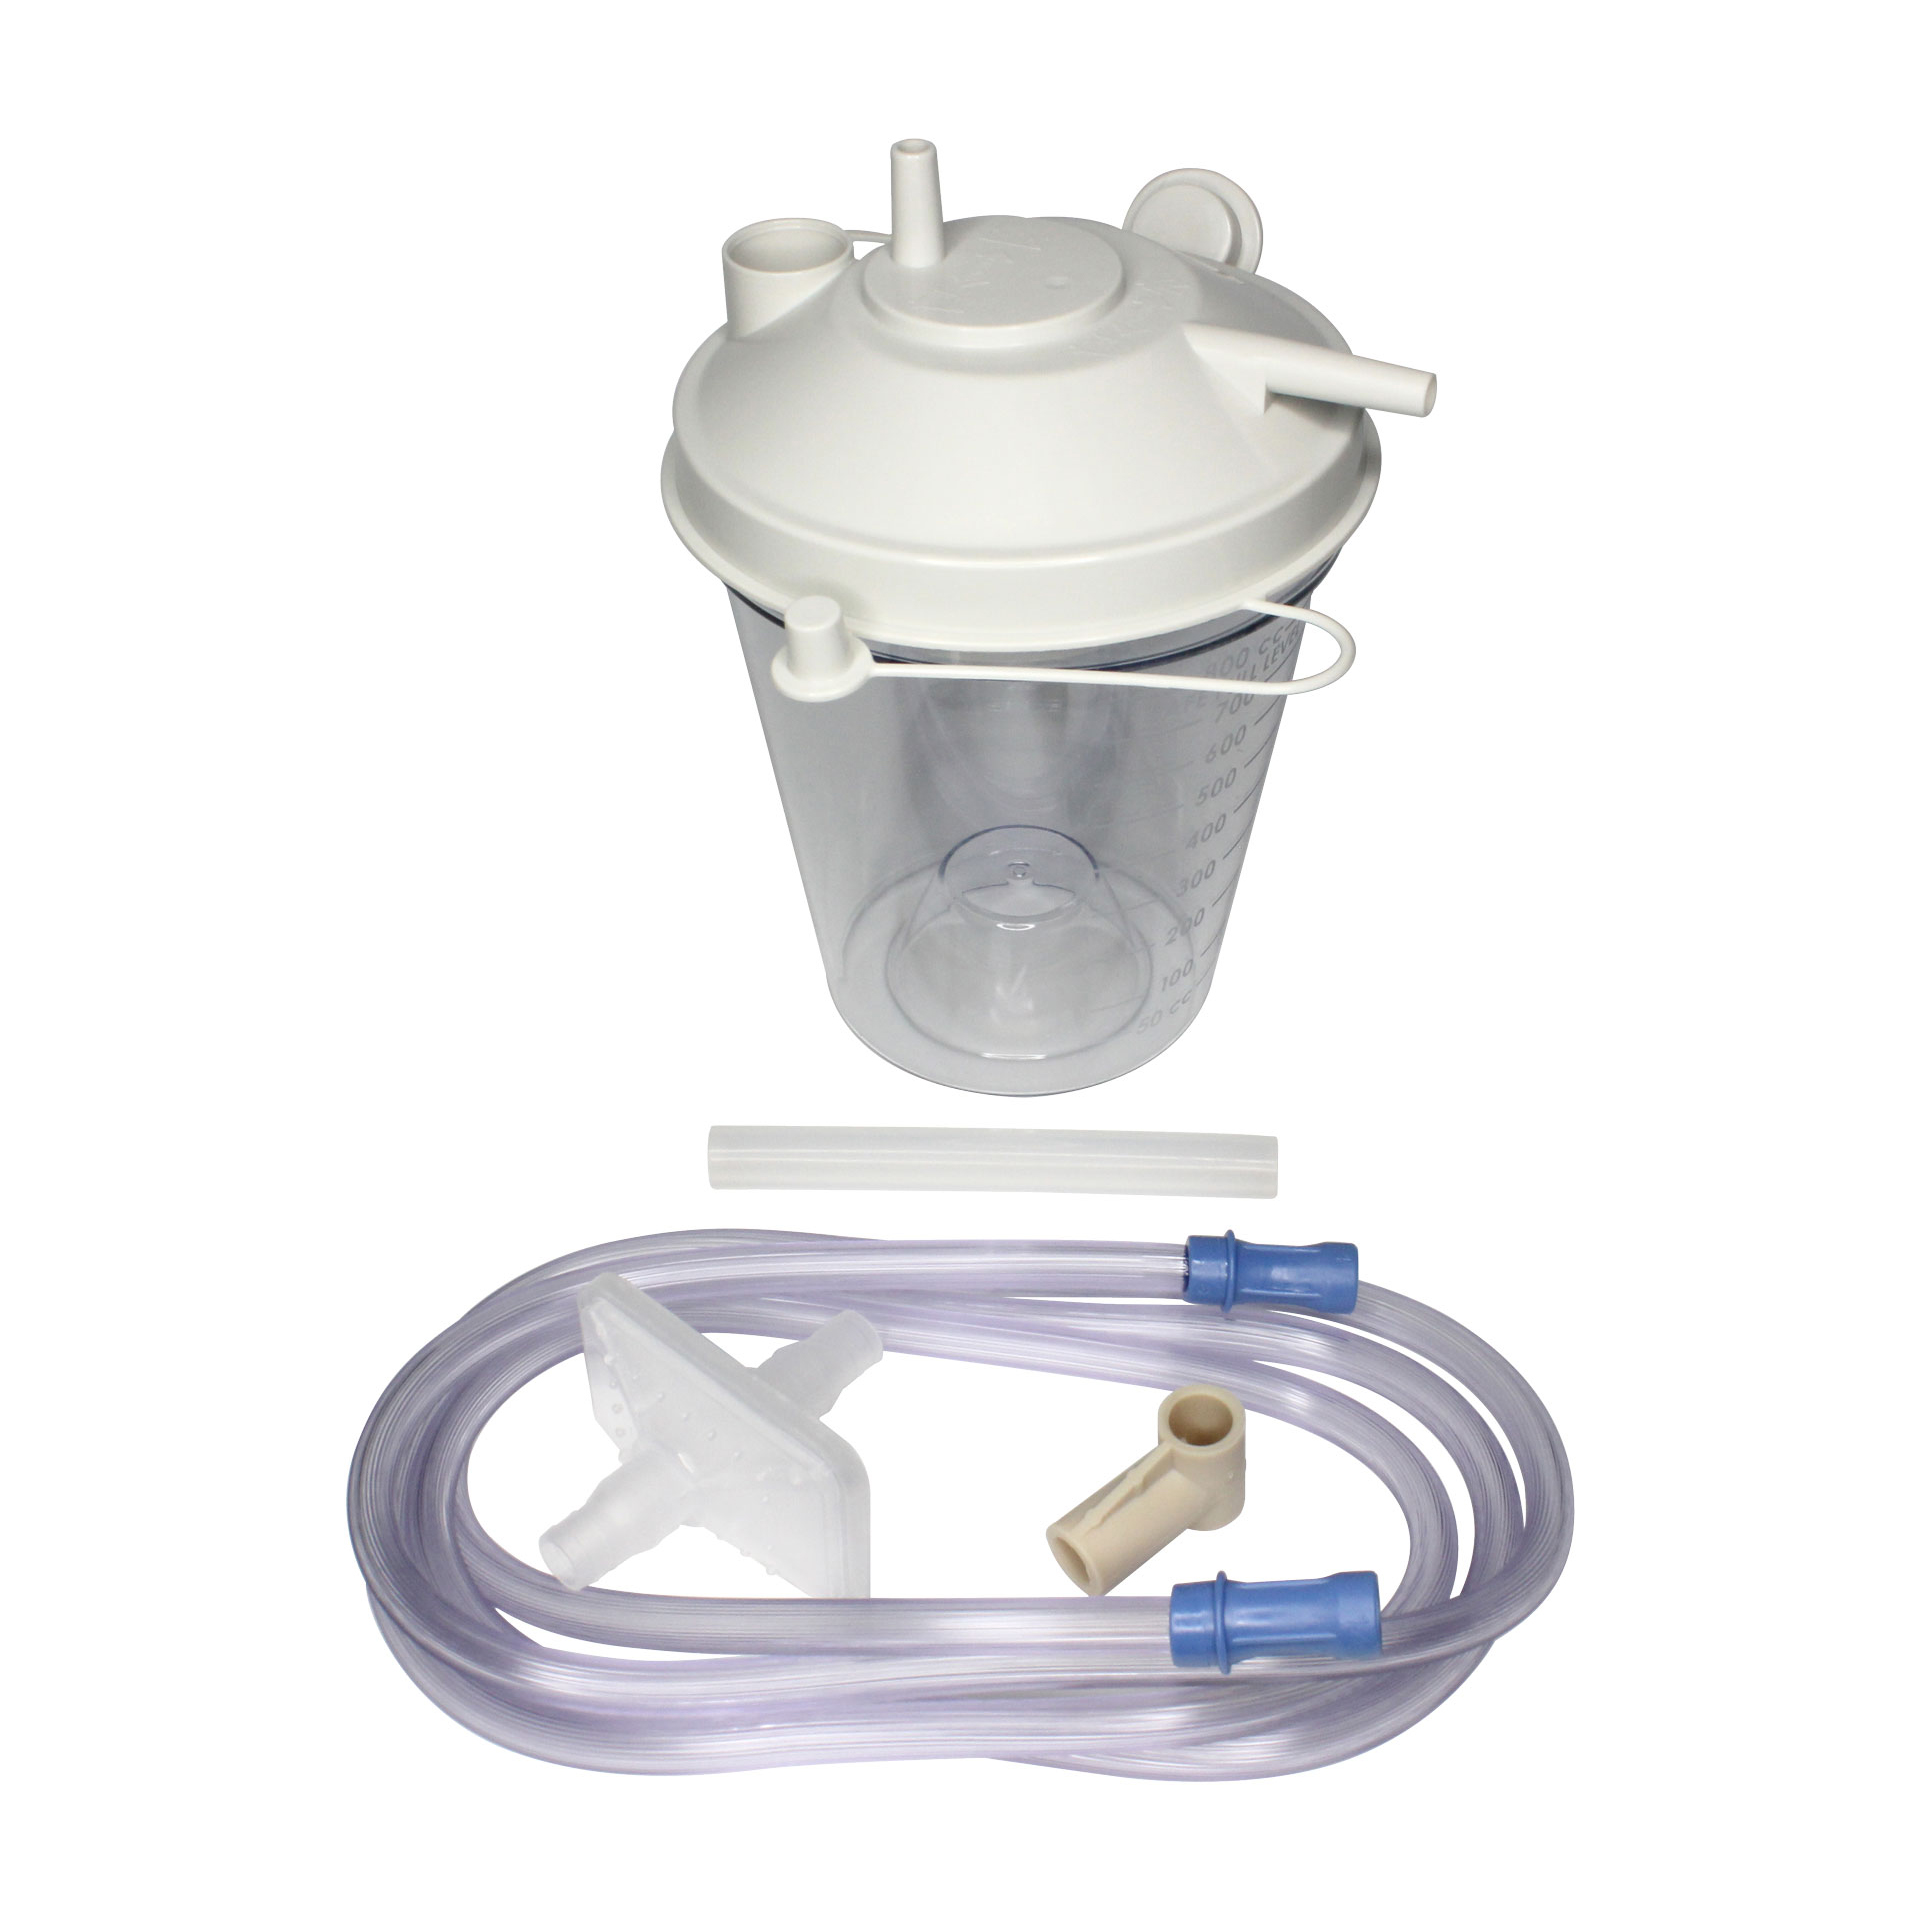 Photograph of RES026S-E - Suction Kit: 1 RES023AW Canister, 1 RES024M Connector Tube 4.5in, 1 RES025 Suction Tubing 6ft, 1 BF3812 Bacteria Filter, 1 RES028 Rubber Elbow